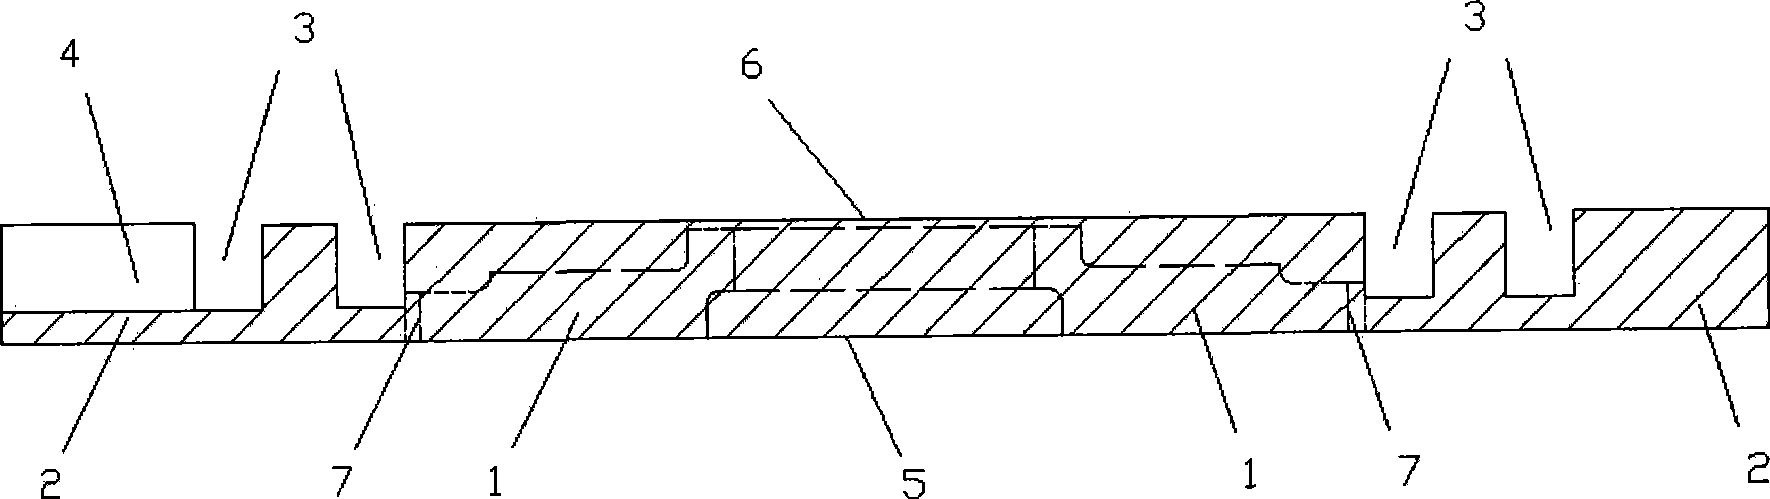 Control method for numerical control machining deformation of wall panel parts